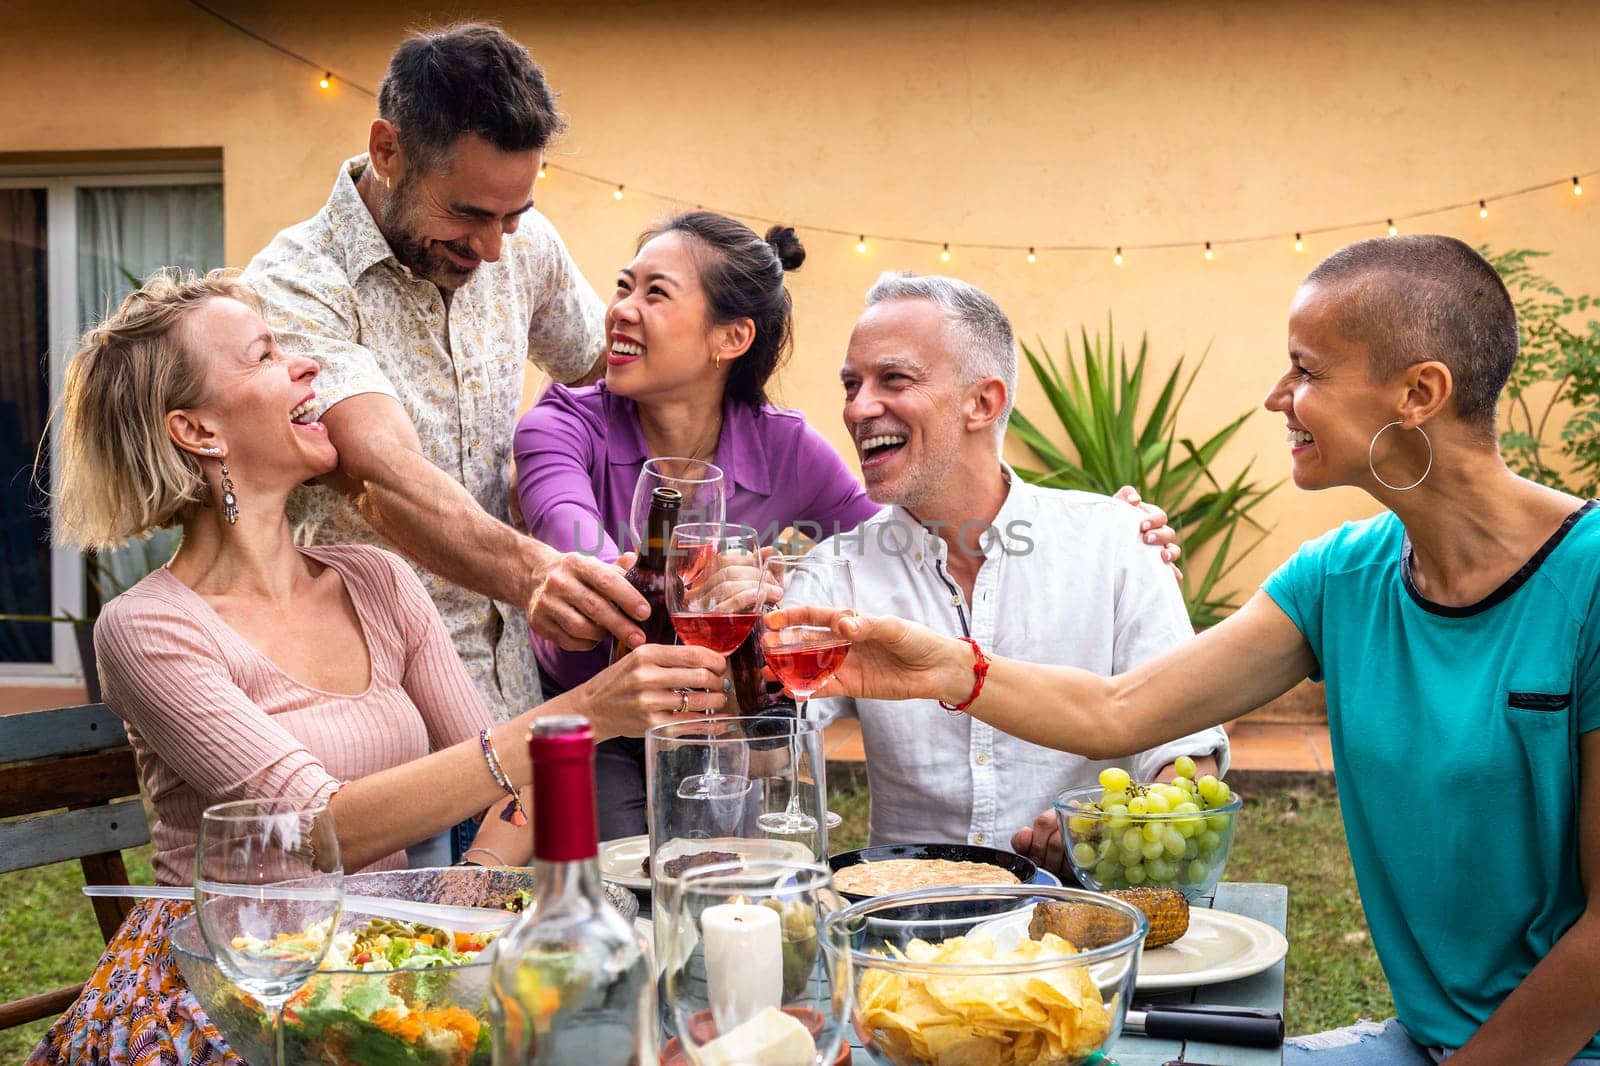 Group of friends celebrating life, toasting with wine, laughing and having fun during barbecue garden dinner party. by Hoverstock